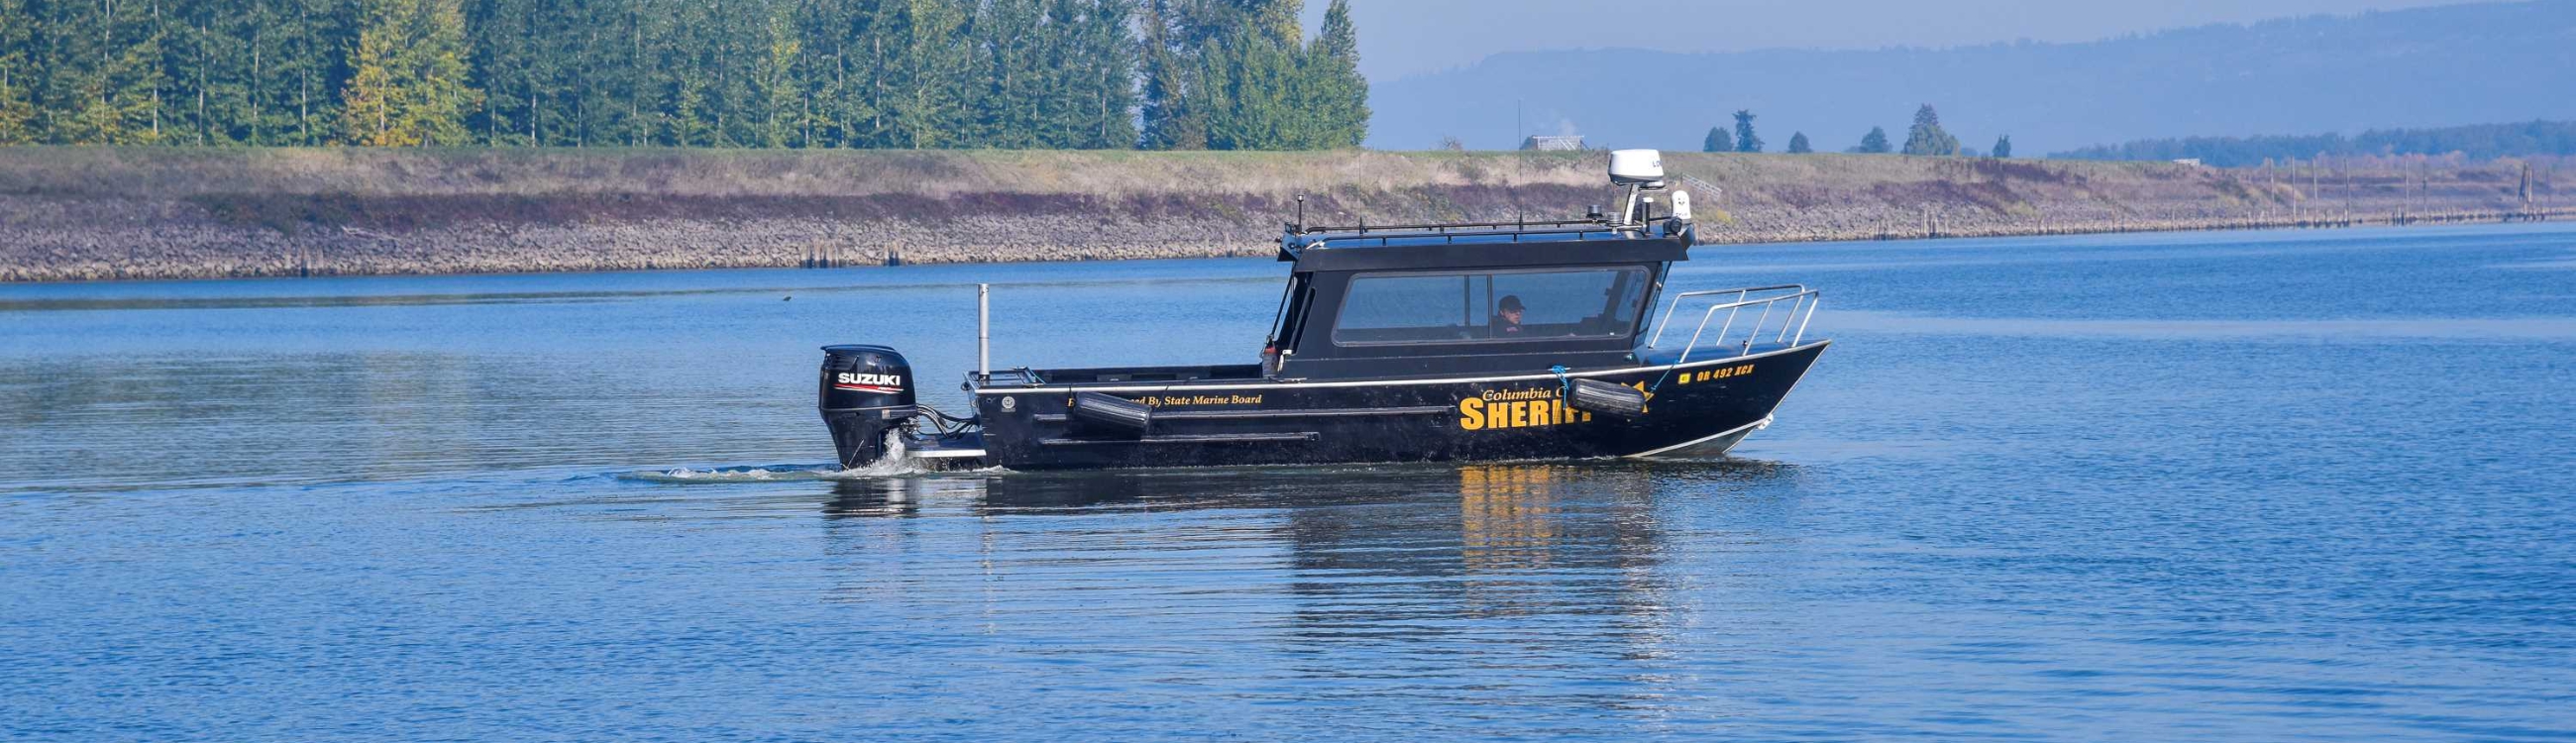 Oregon City woman rescued while adrift in stolen boat, sheriff says